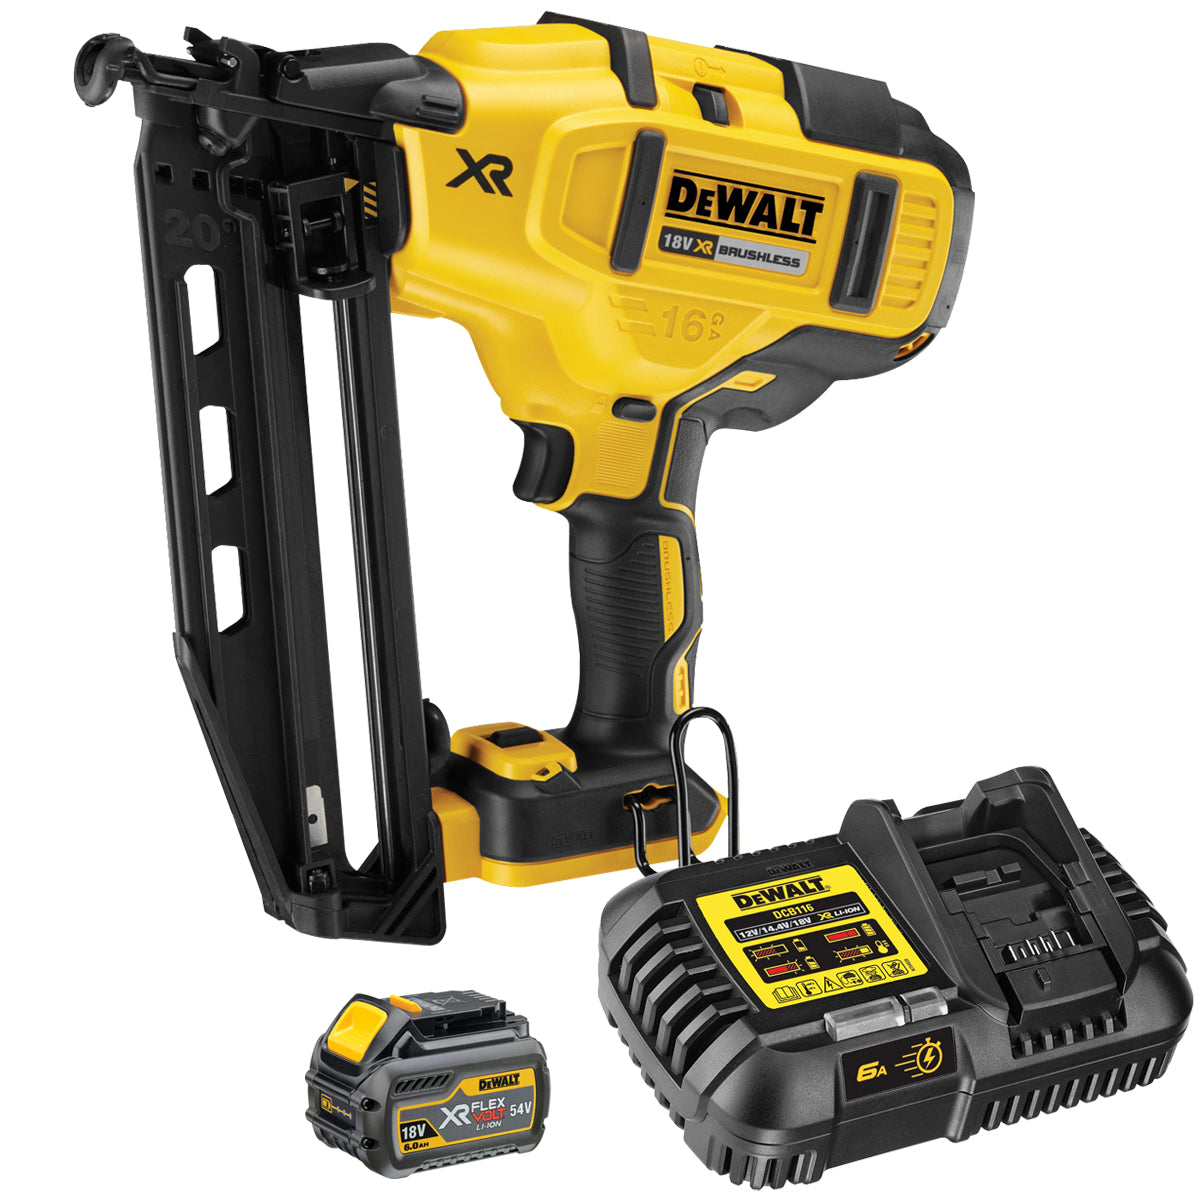 DeWalt DCN660N 18V XR Brushless Second Fix Nailer with 1 x 6.0Ah Battery & Charger